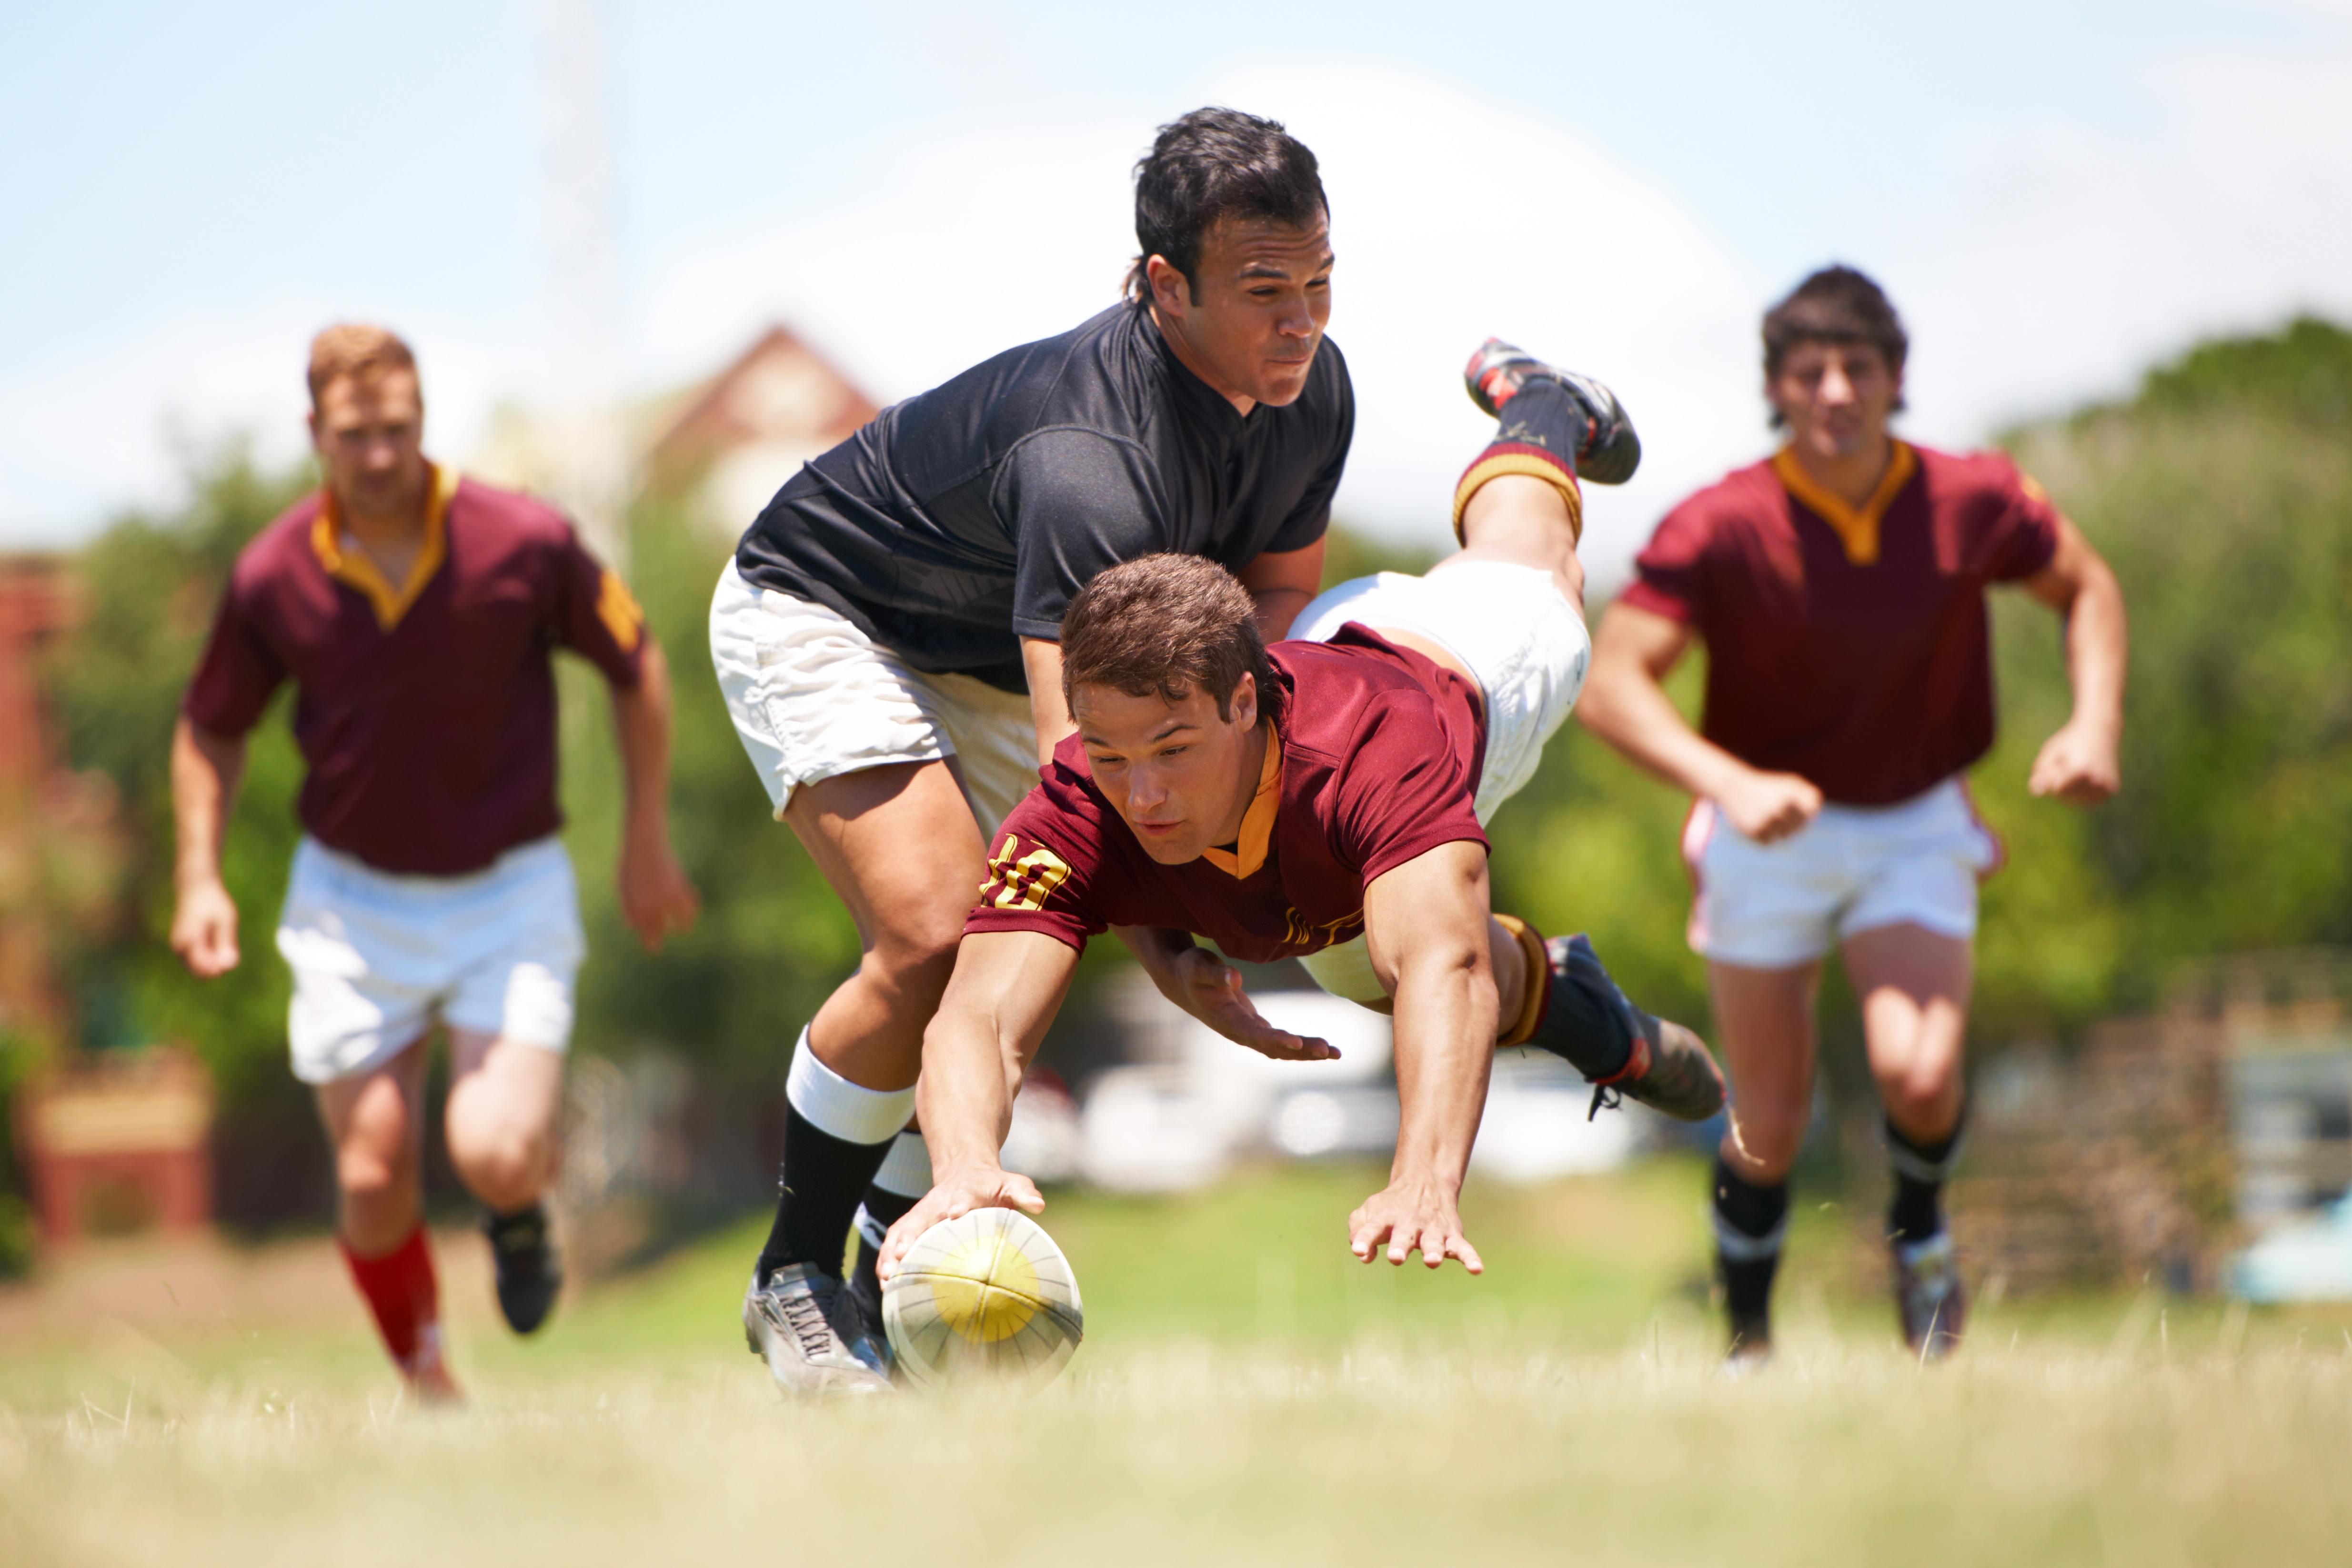 acromioclavicular joint injection - a group of men playing rugby with one player fully horizontal as he dives for the line with hand outstretched to place the ball